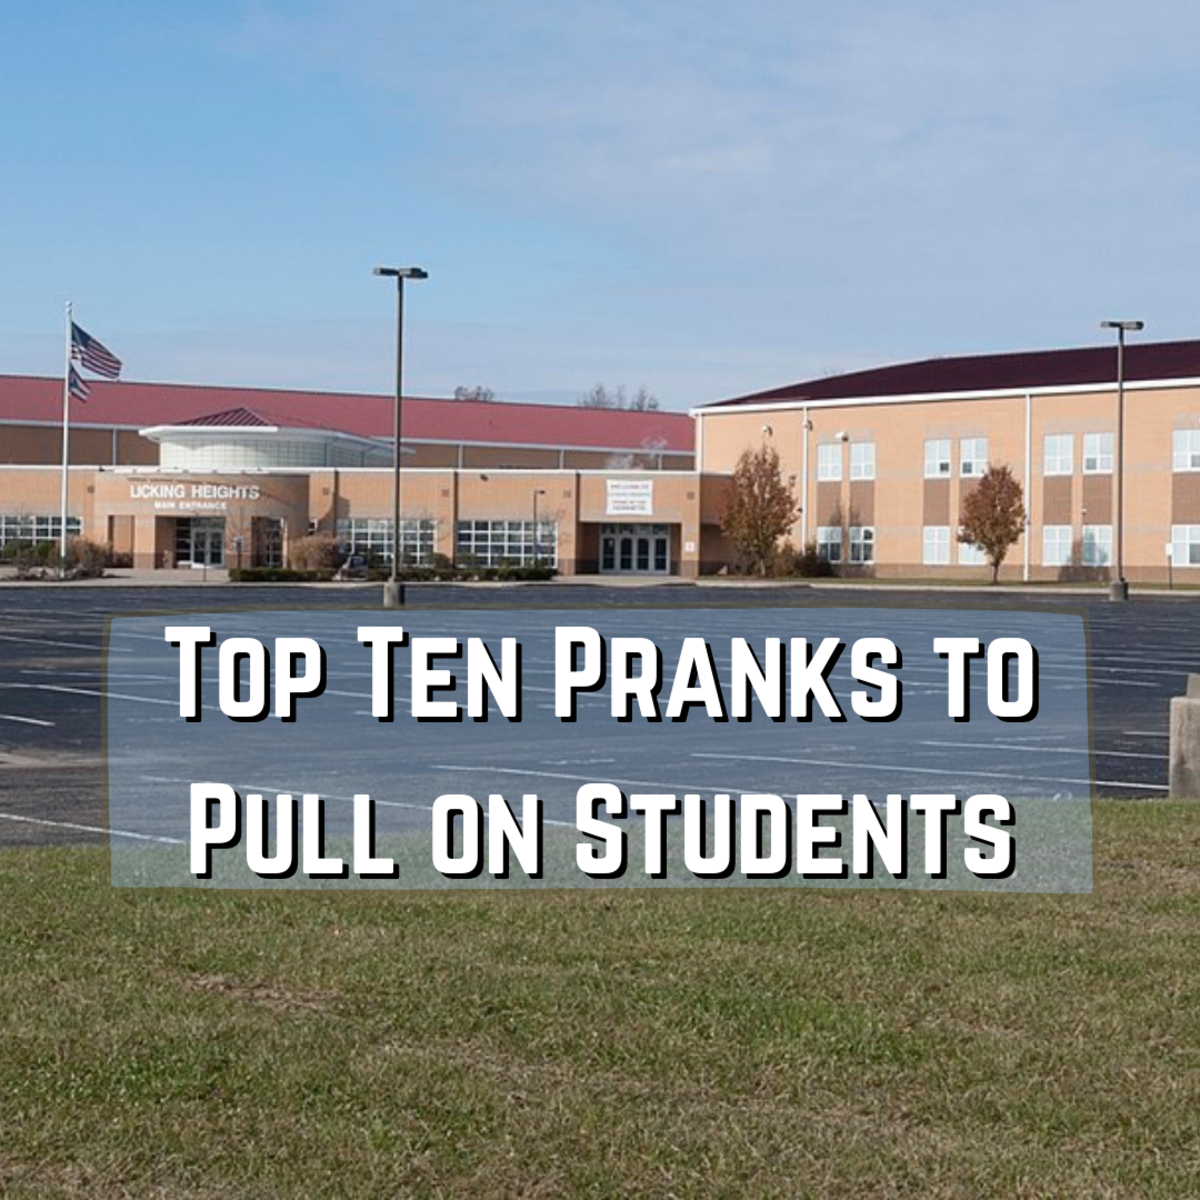 Read on to learn about 10 awesome pranks for teachers to pull on students!